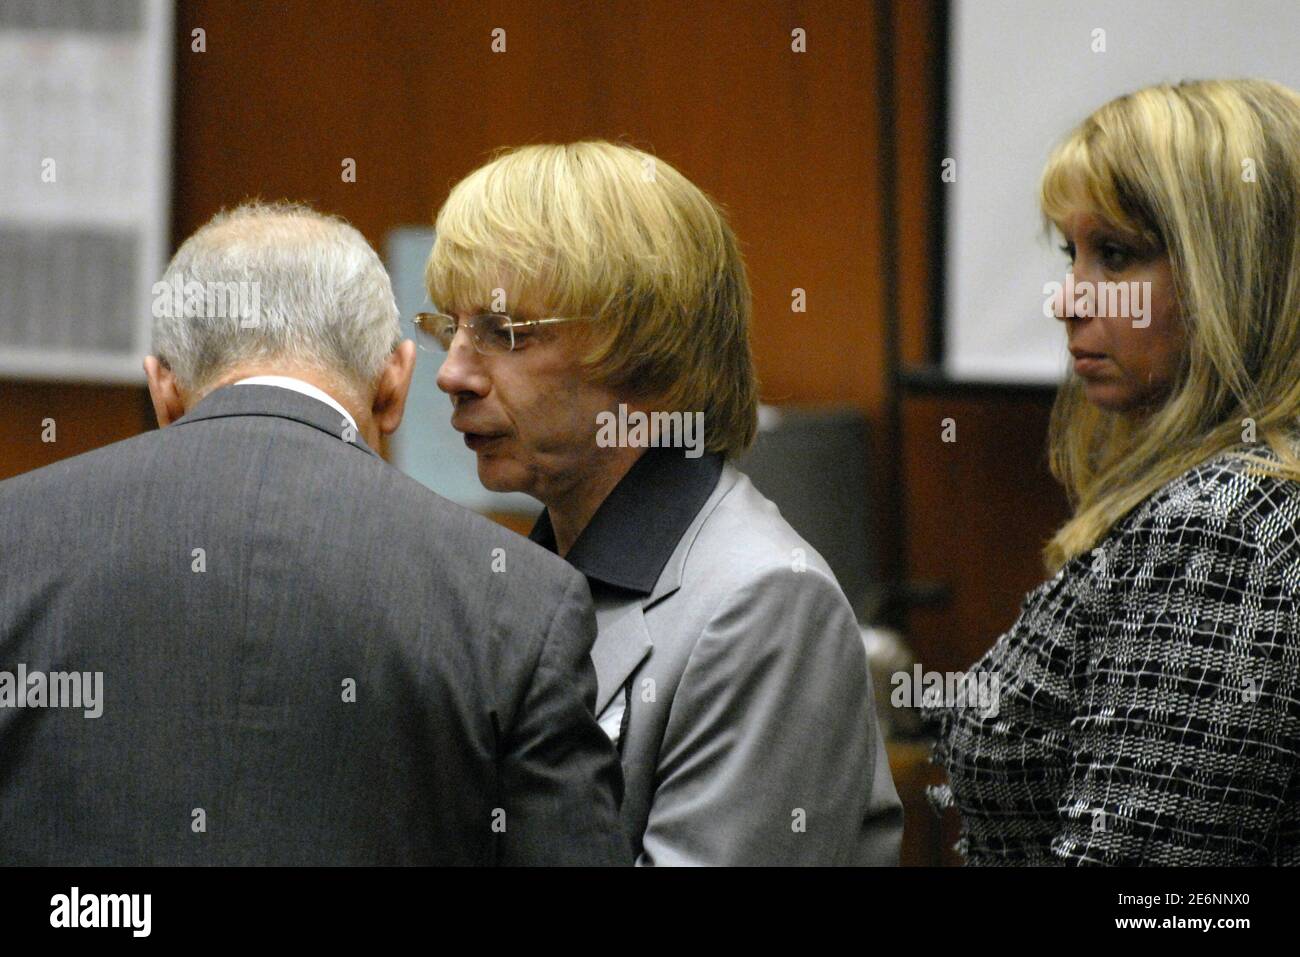 Music producer Phil Spector (C) speaks with his attorney Roger Rosen (L) as defense attorney Linda Kenny Baden listens during Spector's murder trial in Los Angeles Superior Court in Los Angeles, California May 9, 2007. Spector is accused of killing actress Lana Clarkson in his home in 2003.   REUTERS/Jamie Rector/Pool   (UNITED STATES) Stock Photo